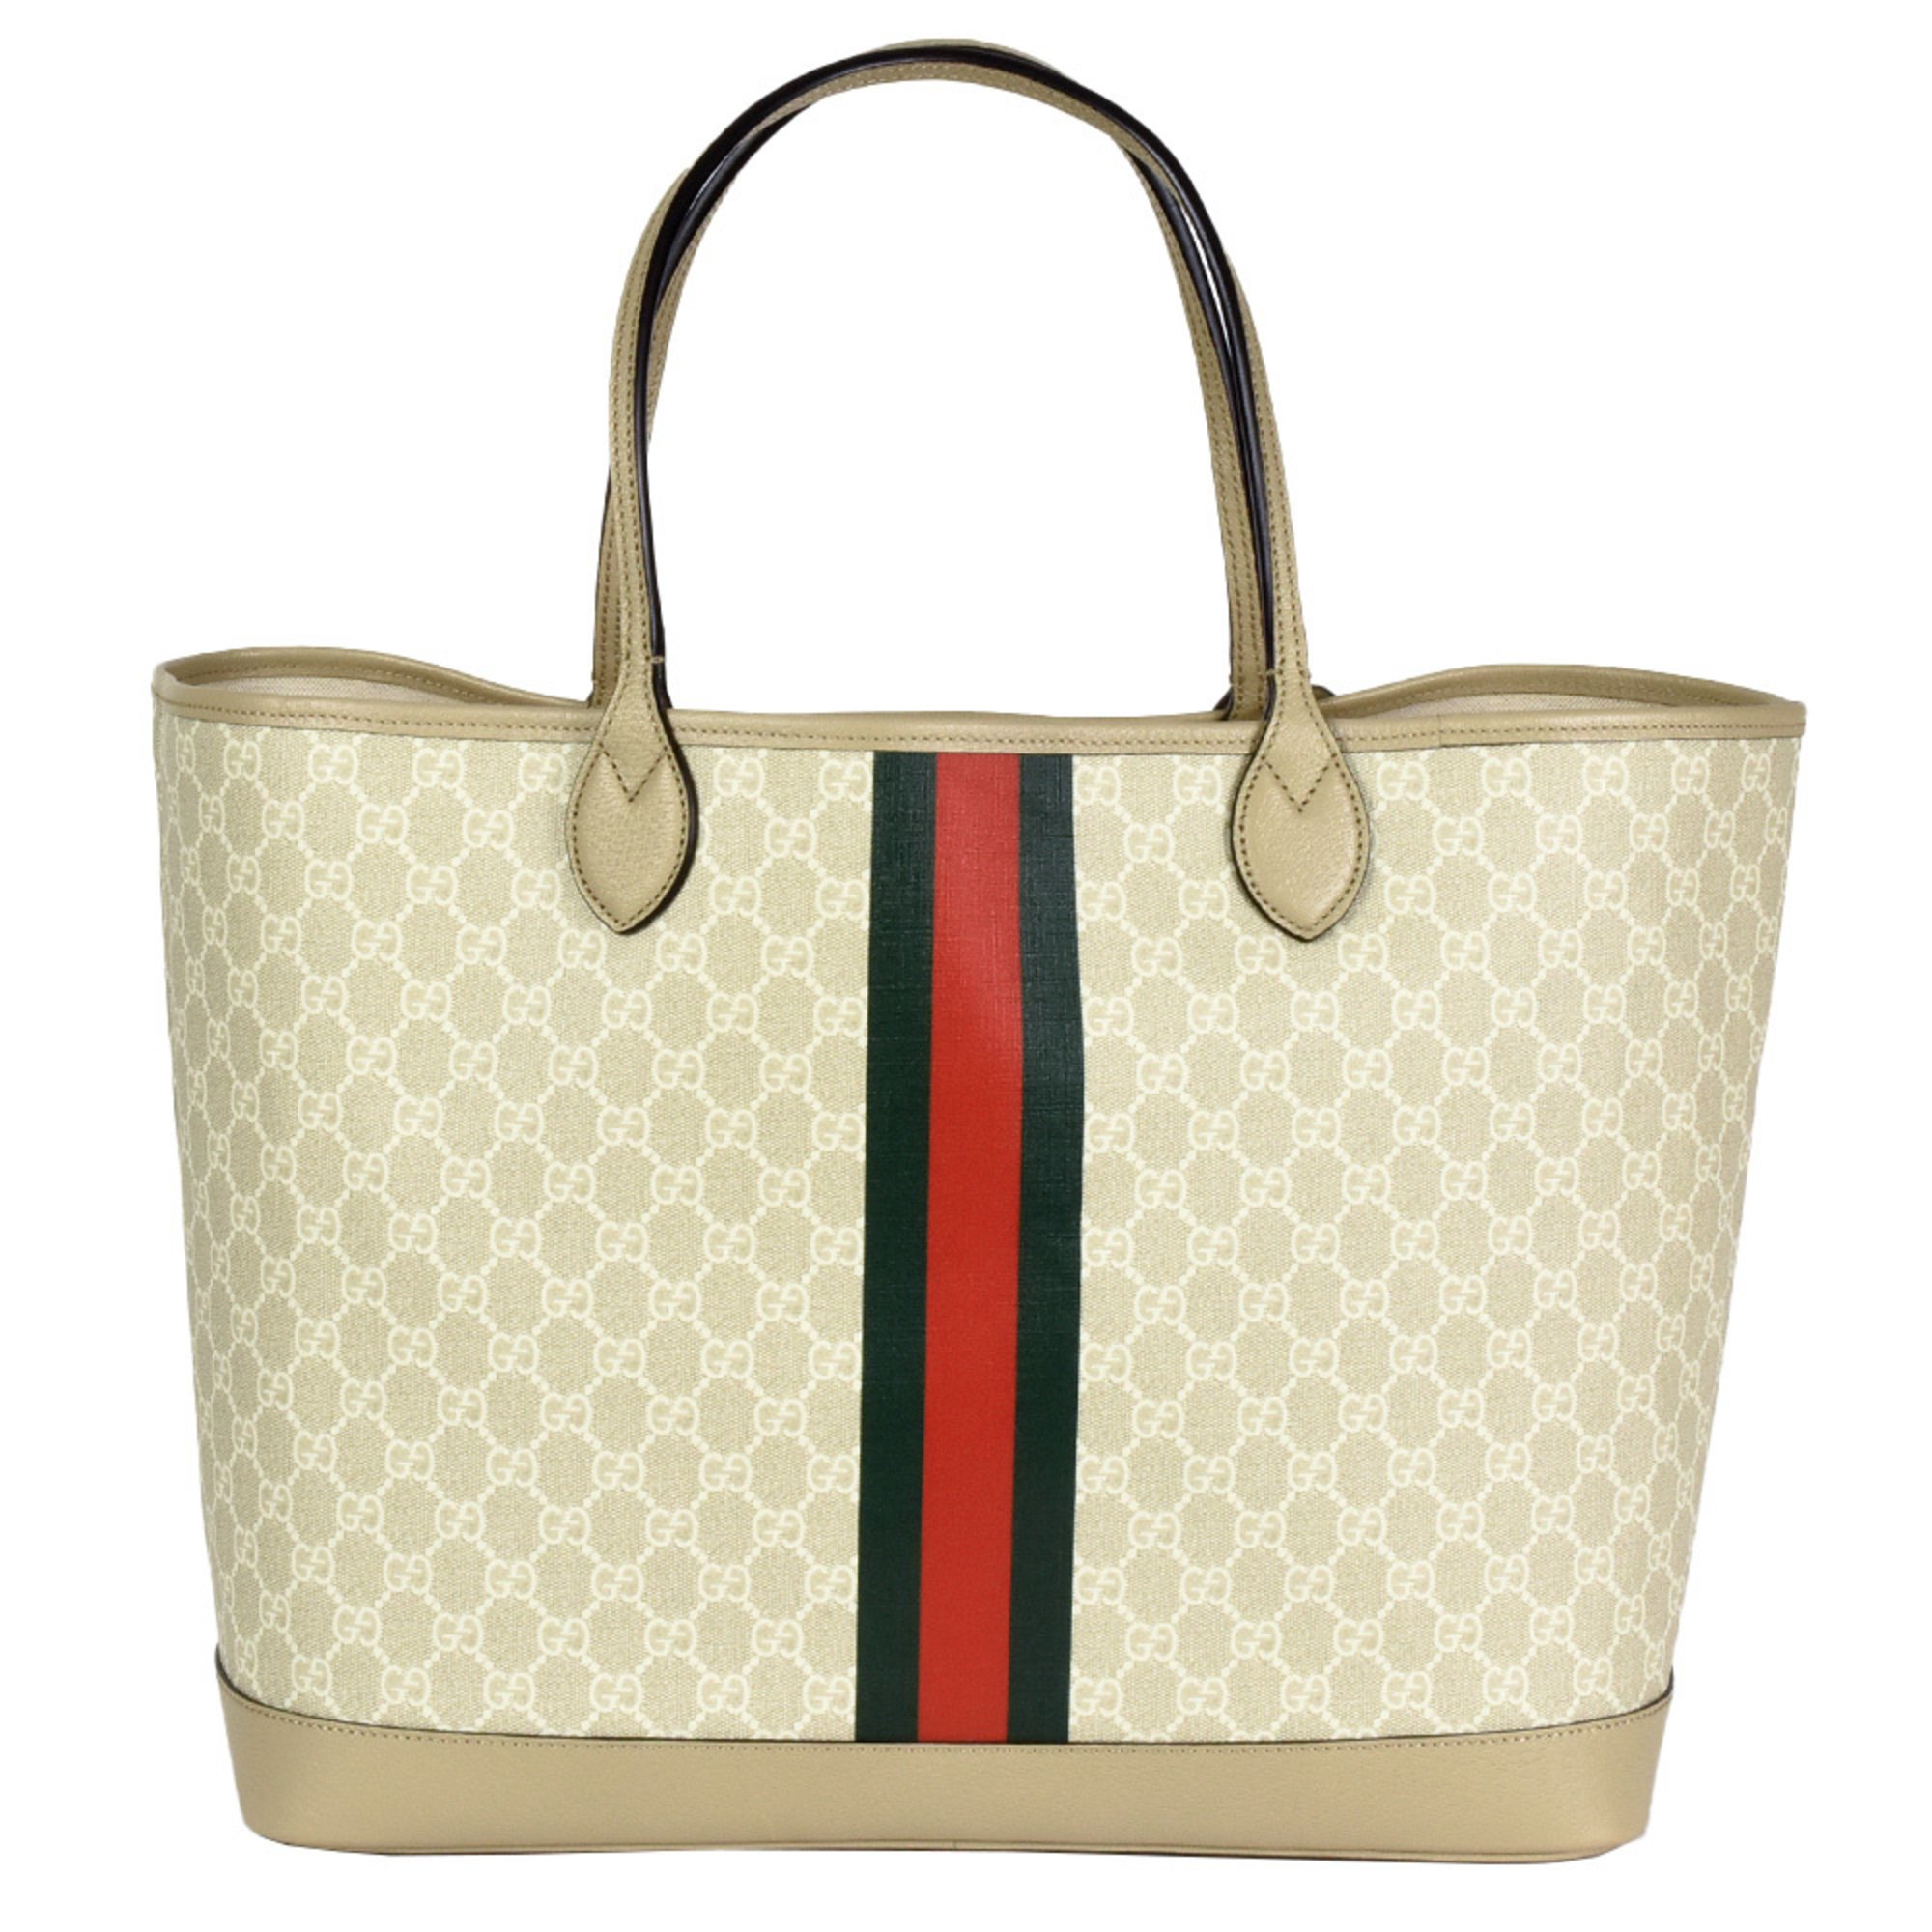 GUCCI Ophidia Large Tote Bag GG Supreme Canvas Leather 726755 FABKZ Beige